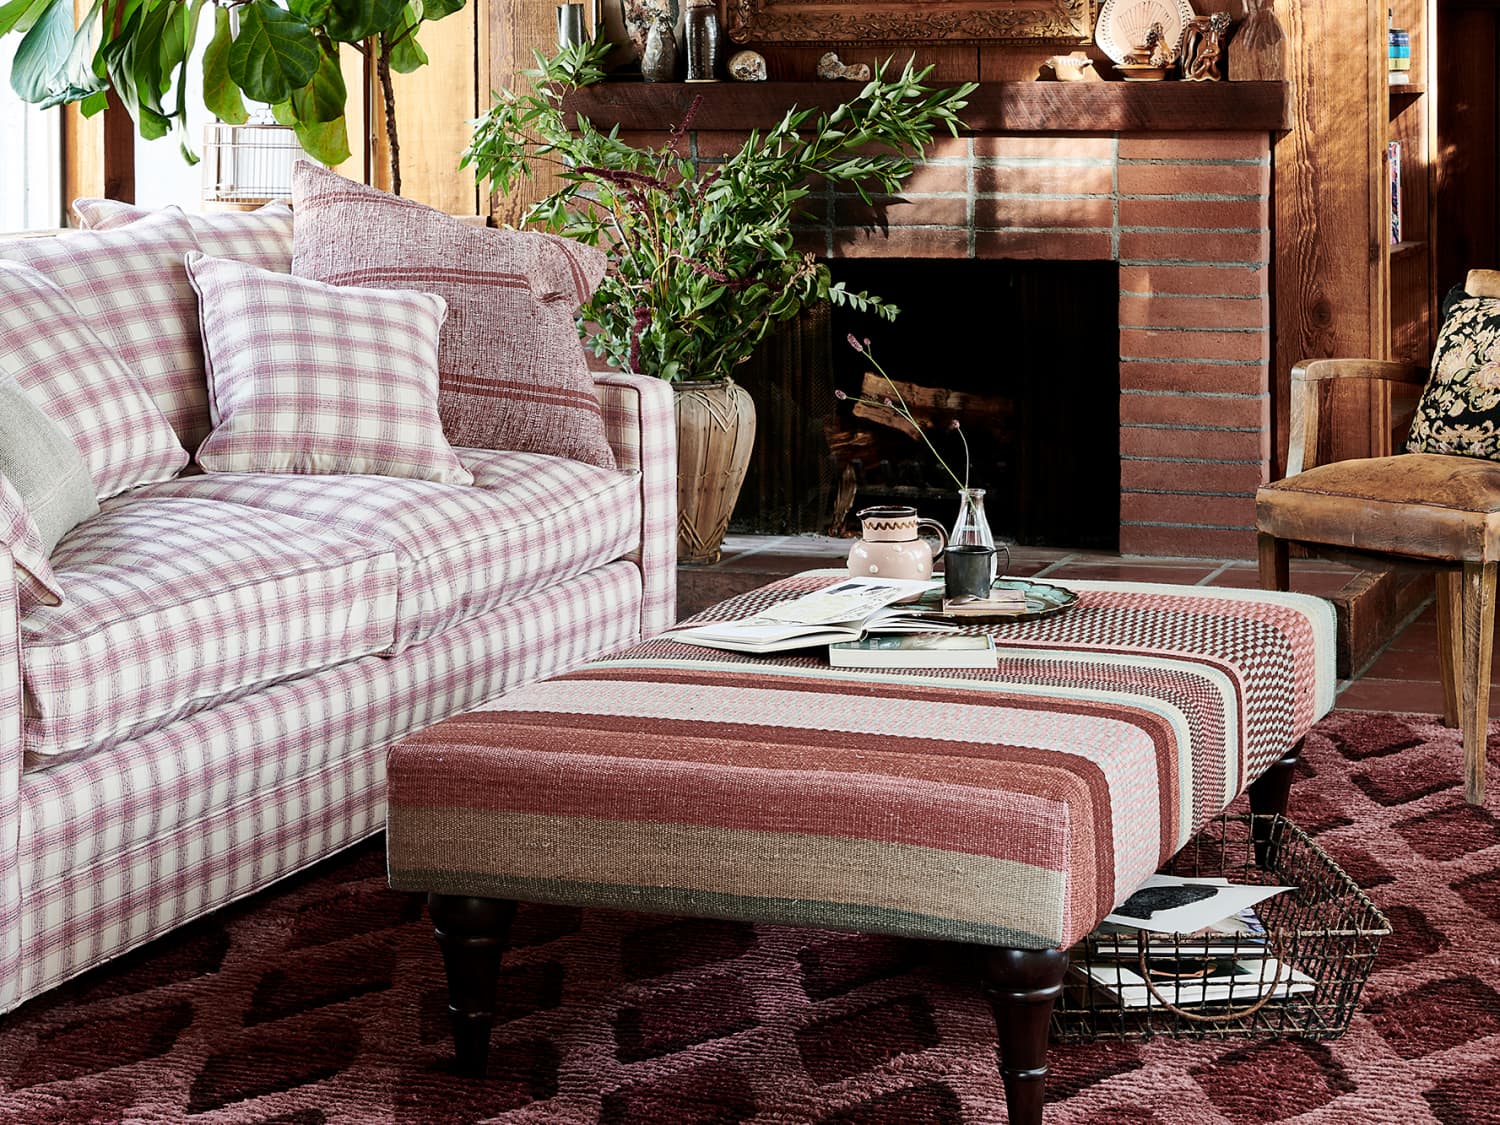 https://cdn.apartmenttherapy.info/image/upload/f_jpg,q_auto:eco,c_fill,g_auto,w_1500,ar_4:3/at%2Fstyle%2Fhadley-square-arm-upholstered-sofa-87-pink-plaid-horizontal